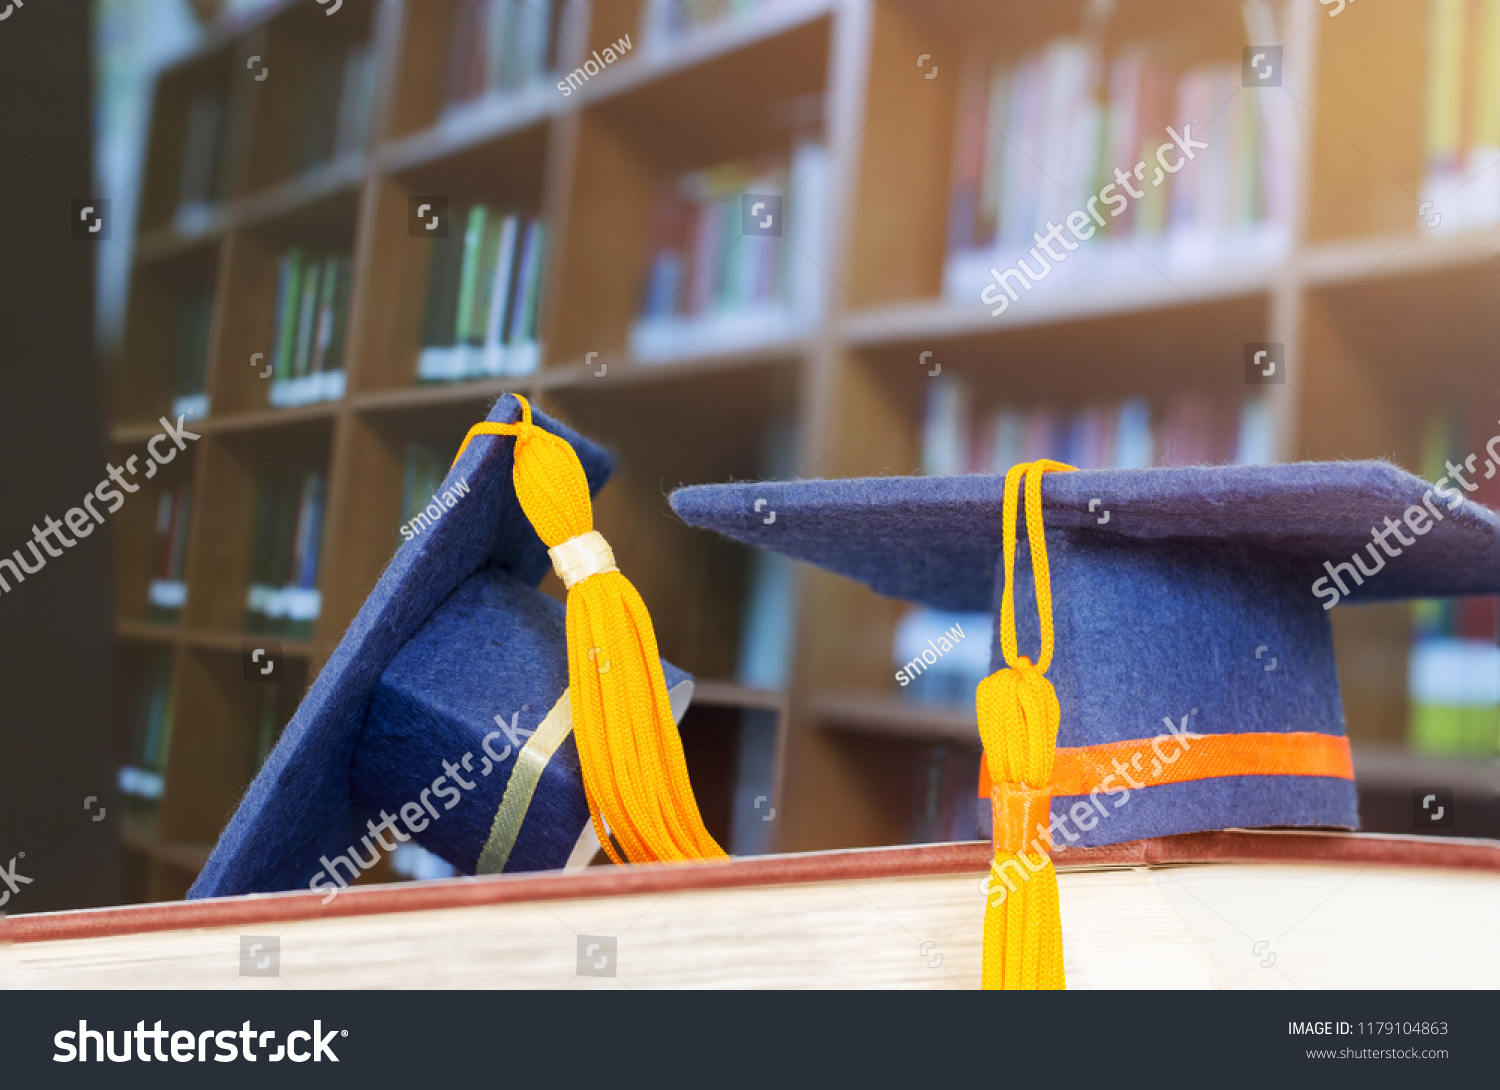 Graduate or Education knowledge learning study abroad concept : Graduation cap on opening textbook in old library stack of text literature on table with bookshelves in university college, light flare #1179104863